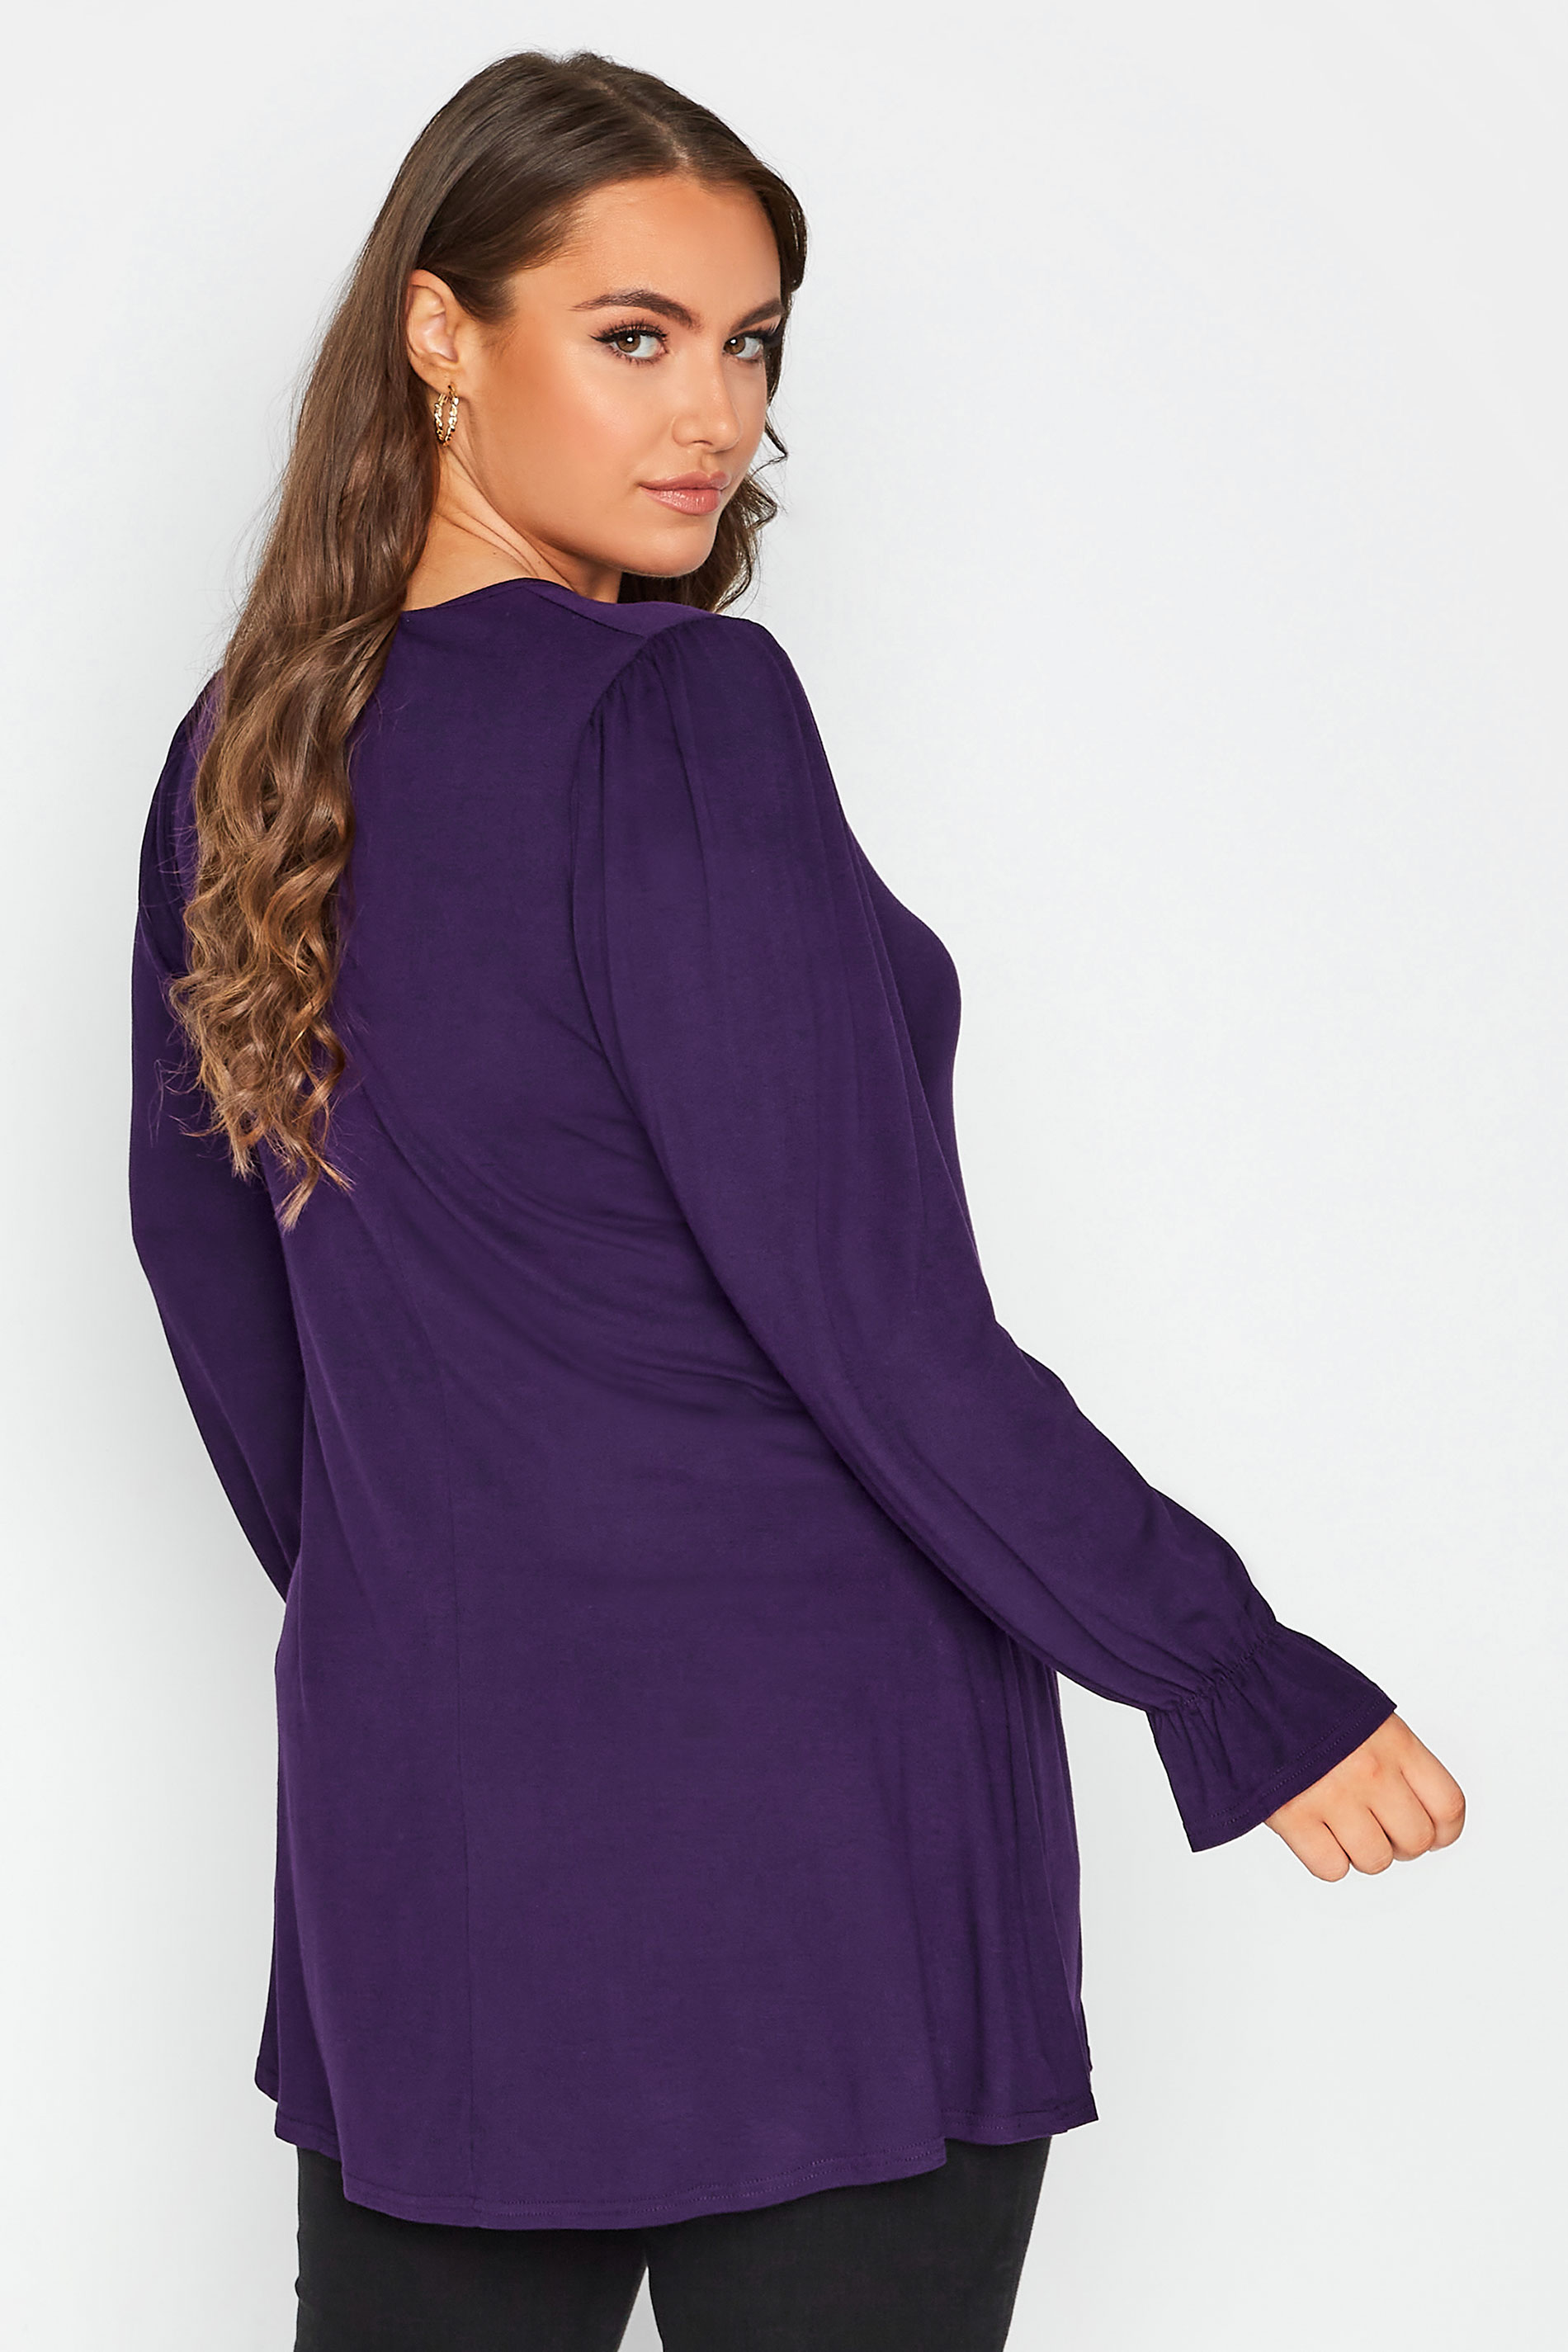 LIMITED COLLECTION Plus Size Purple Lattice Front Top | Yours Clothing 3